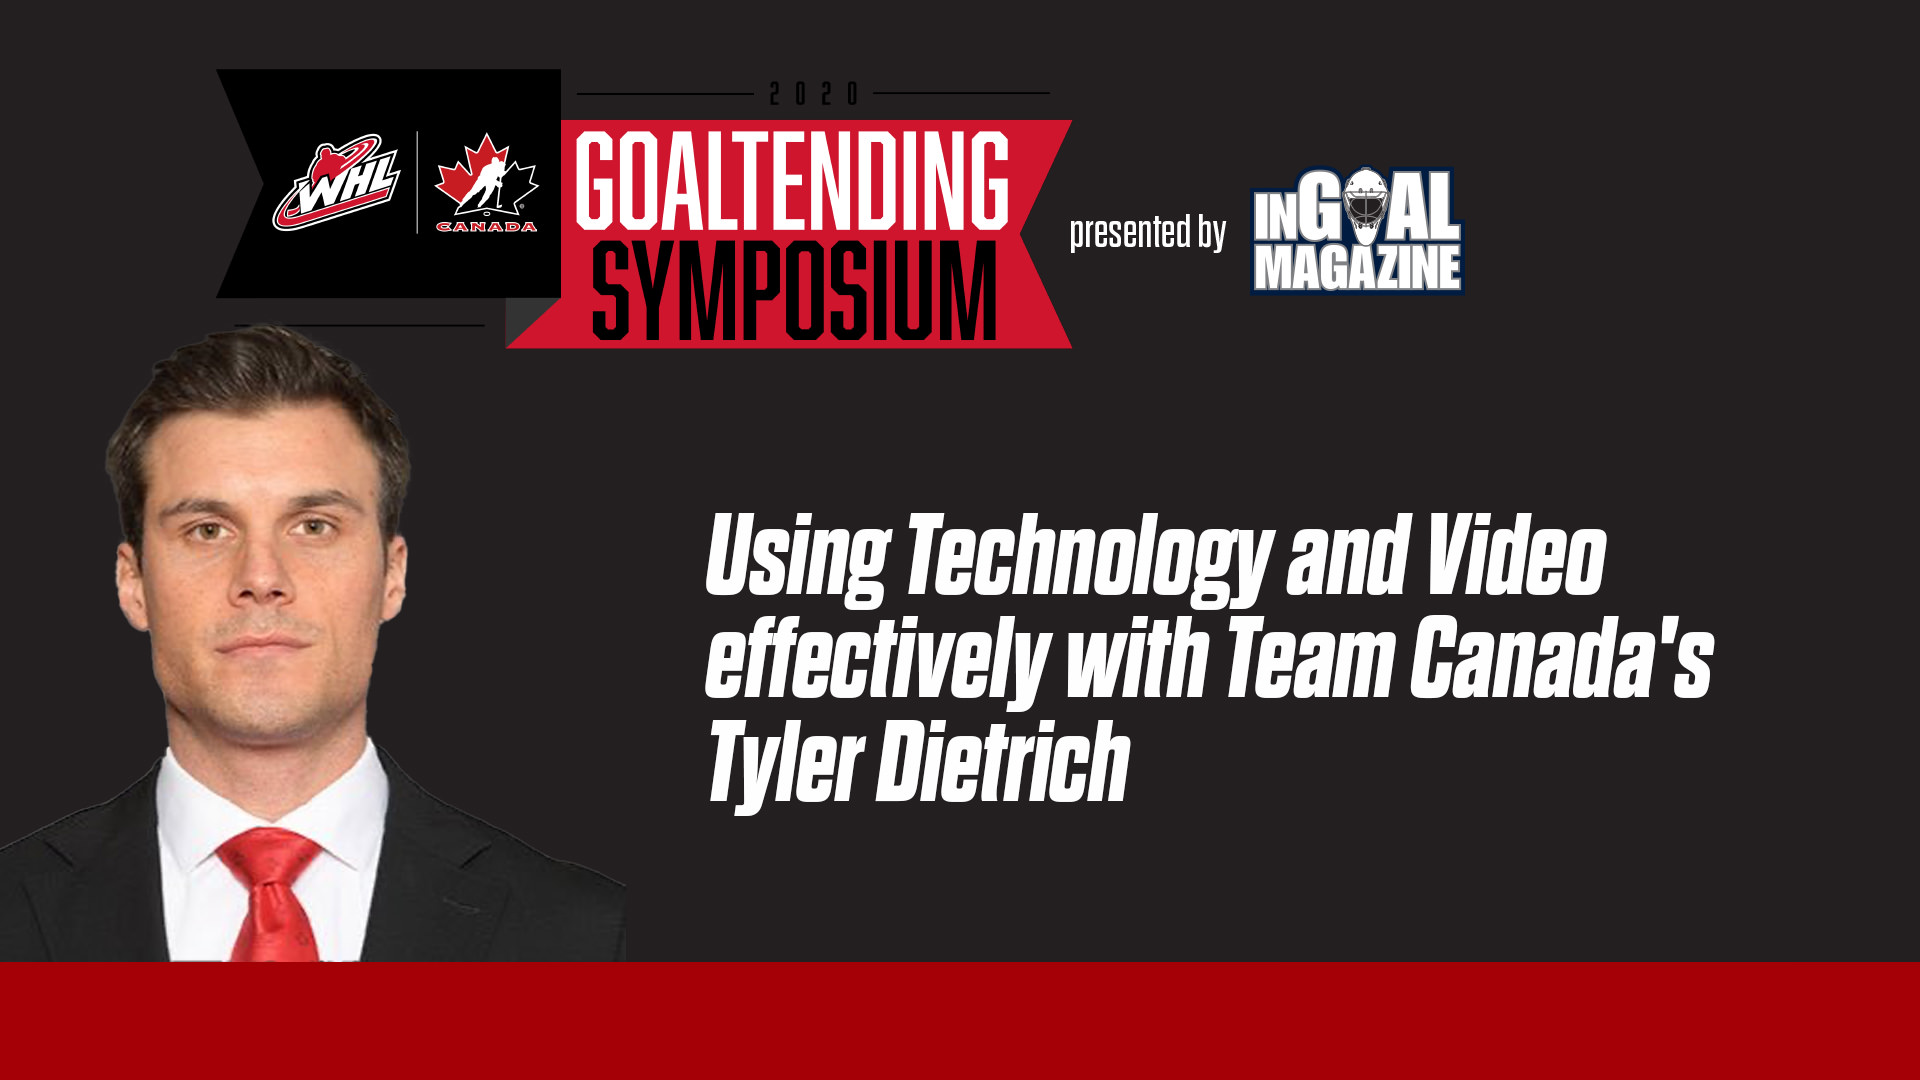 Using Technology and Video Effectively with Team Canada’s Tyler Dietrich